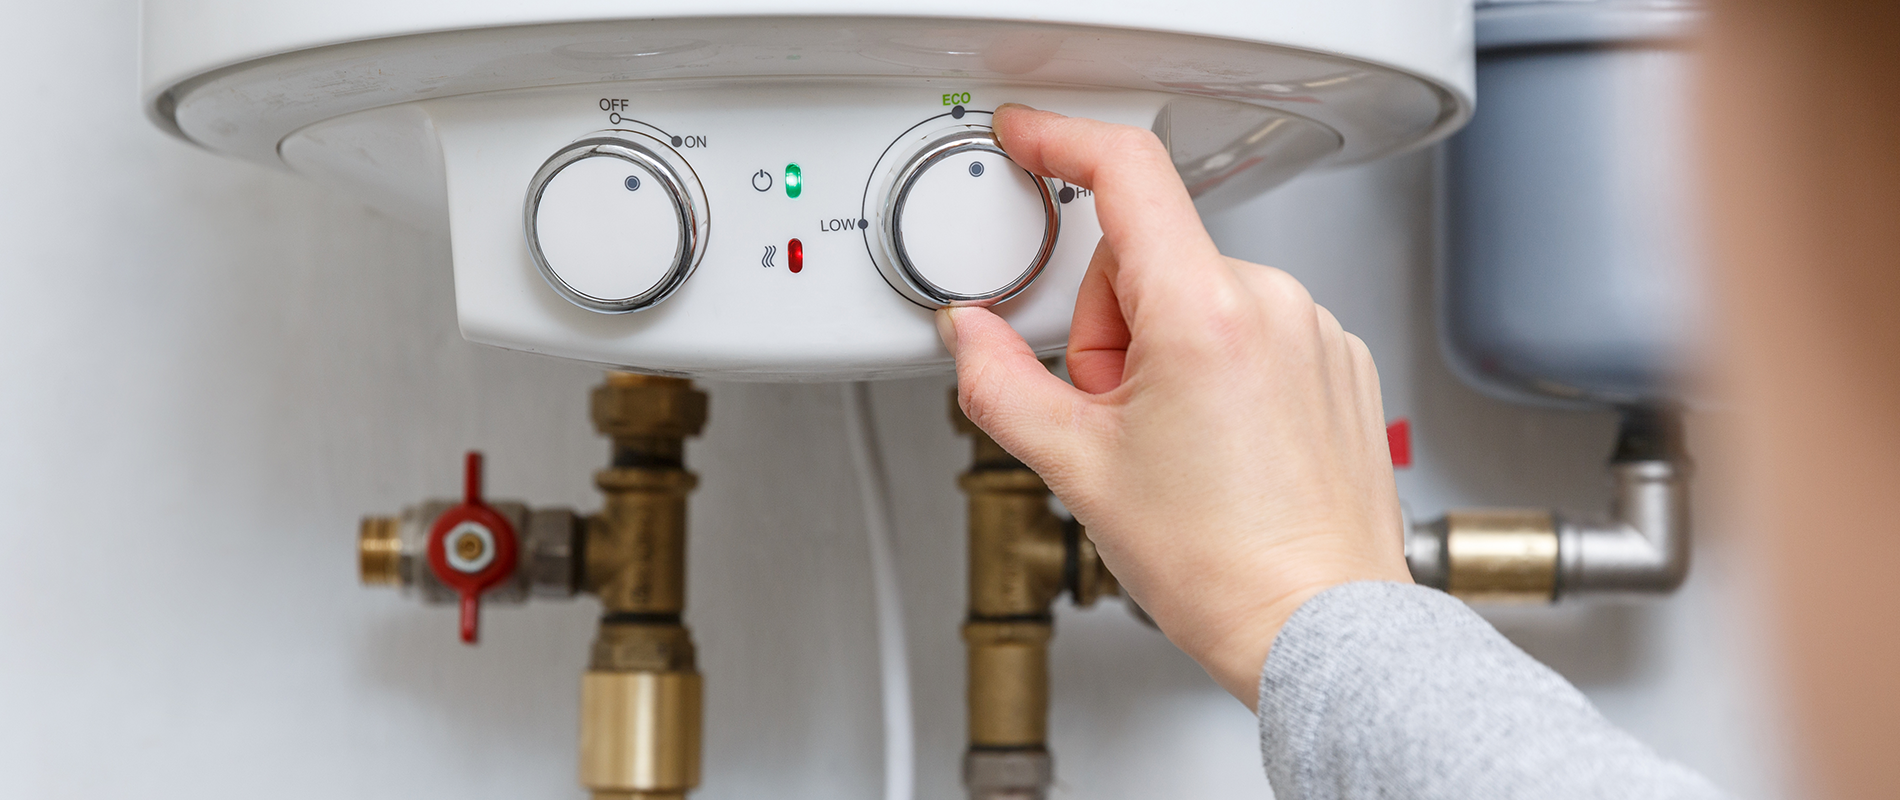 Should You Replace Your Water Heater?